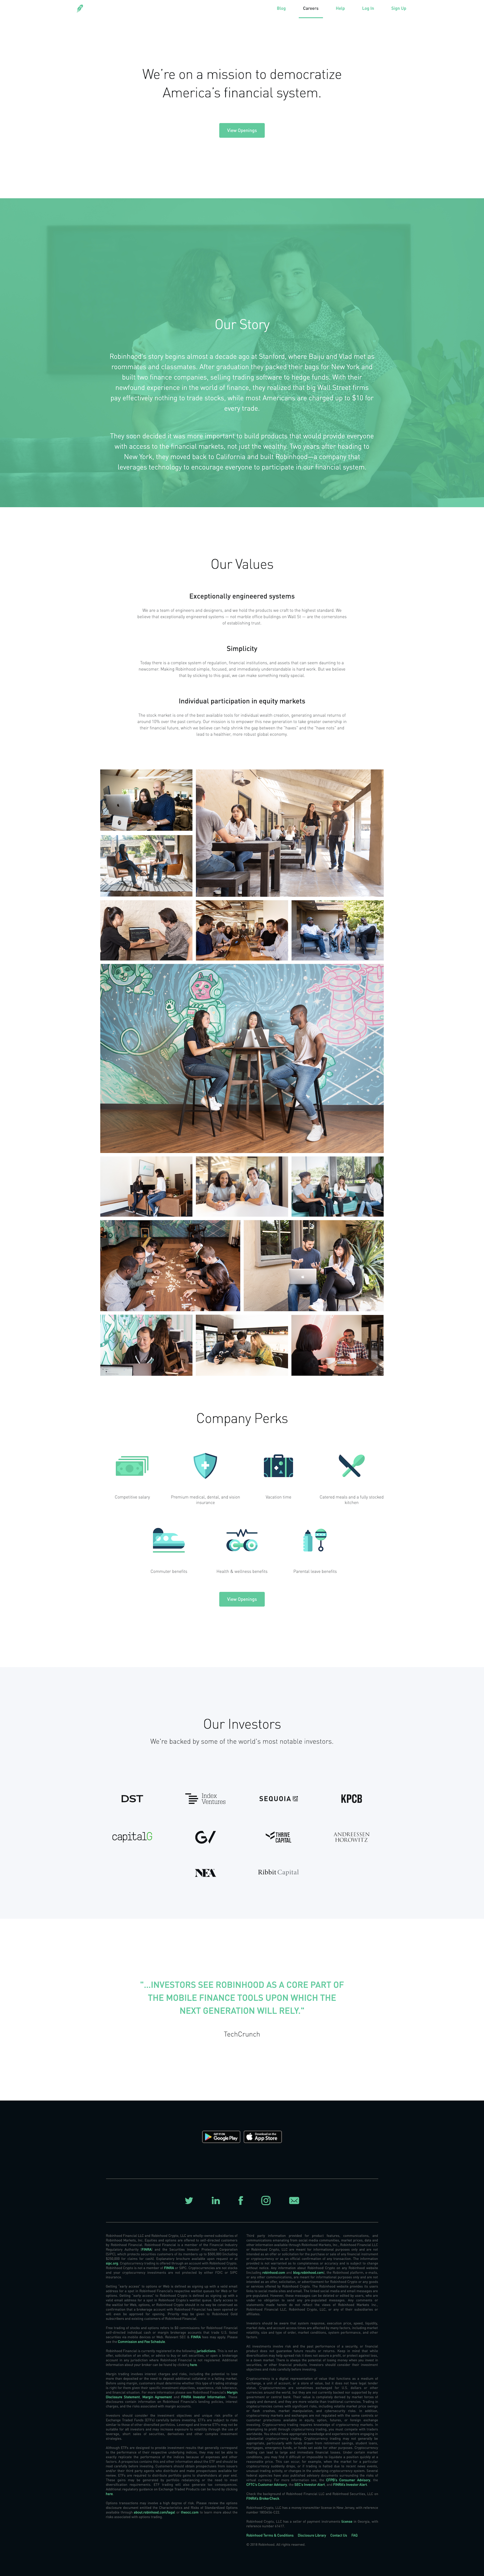 Screenshot of the Careers - Main page from the Robinhood website.